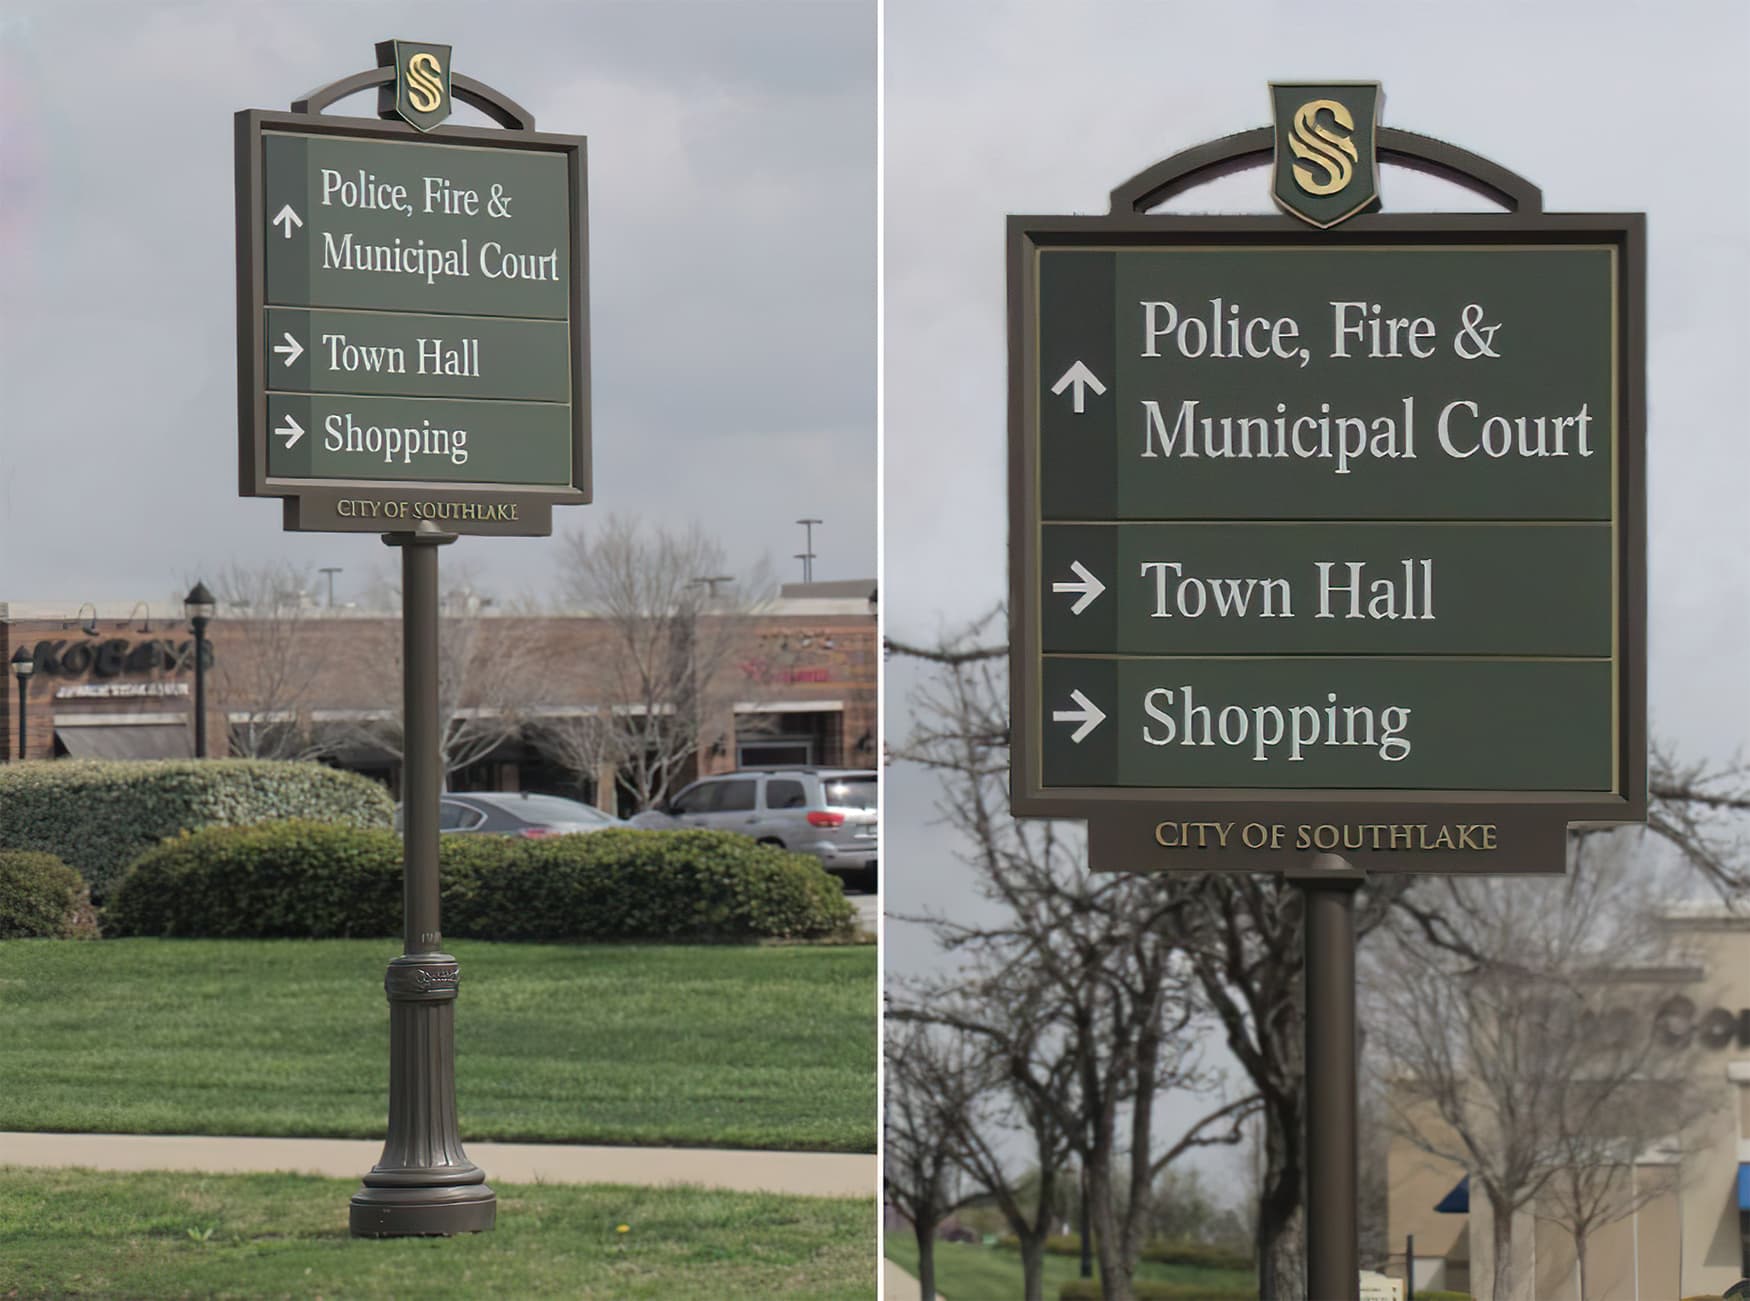 RSM Design worked with The City of Southlake to develop wayfinding signage around the city. Civic Design. Vehicular Wayfinding Design.